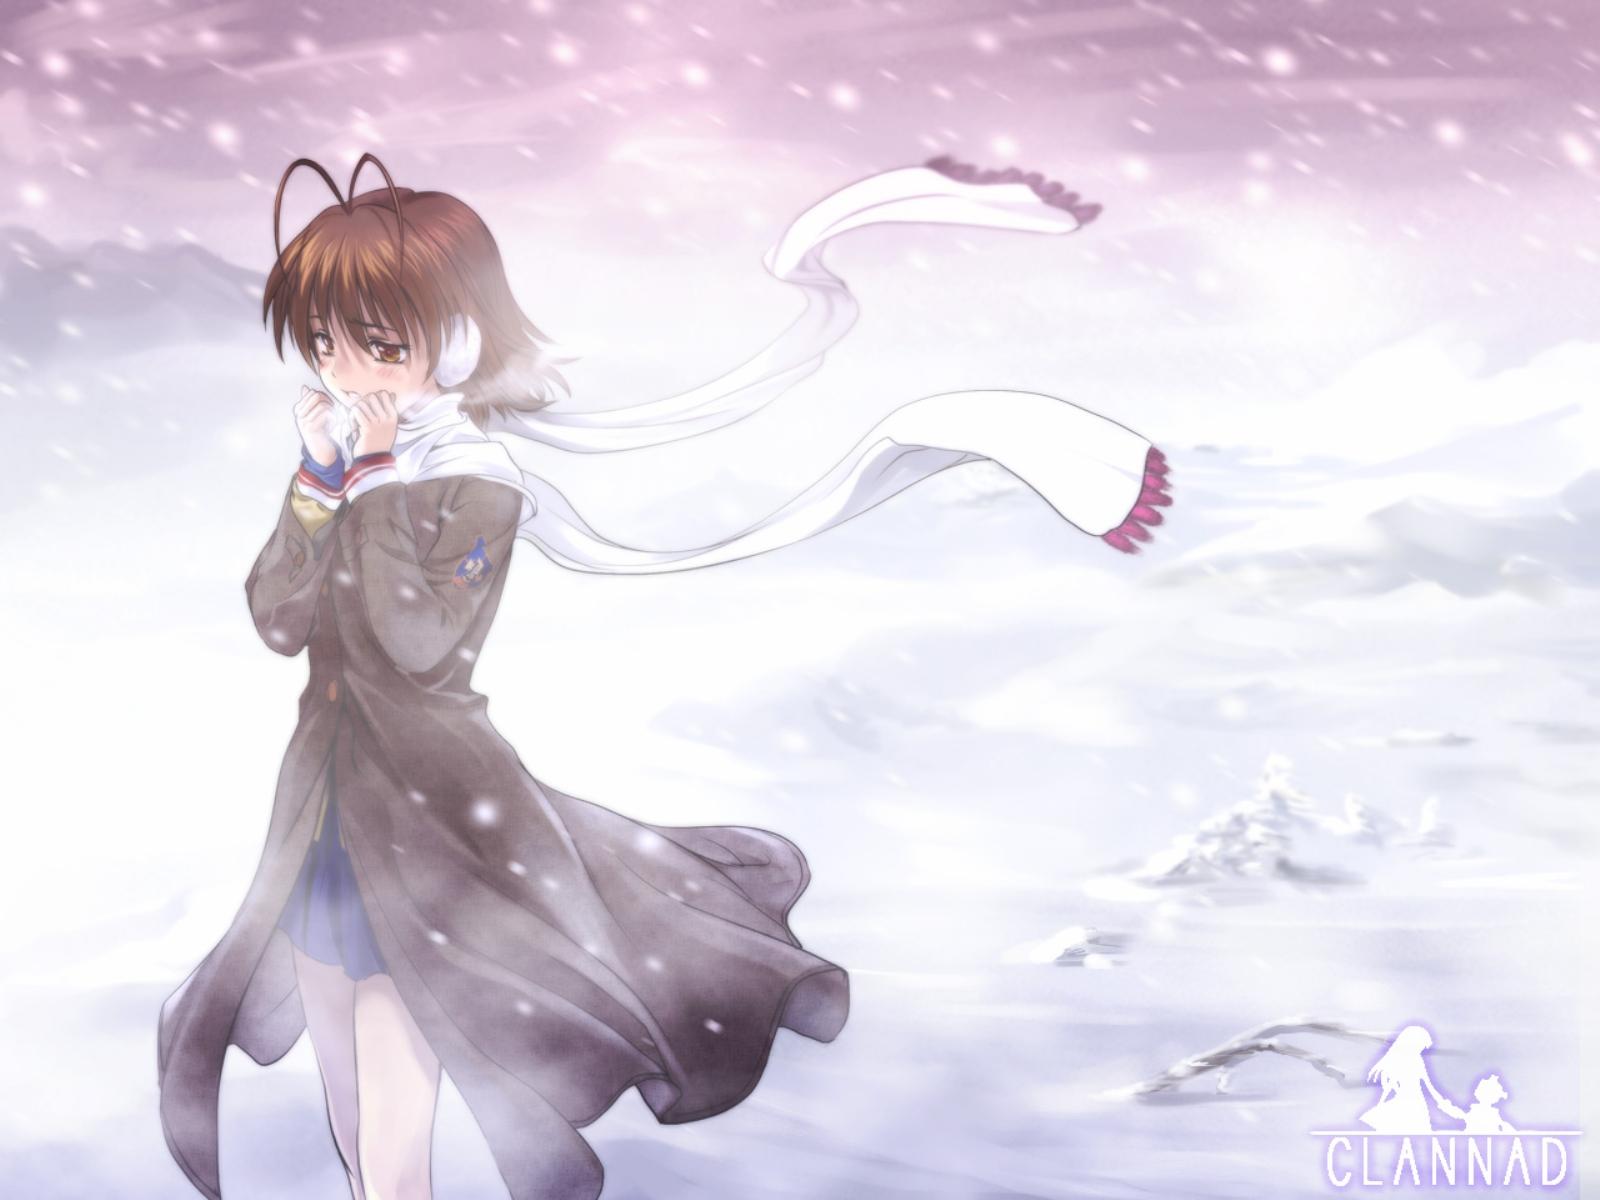 Clannad Wallpaper Nagisa 2K wallpapers and backgrounds photos